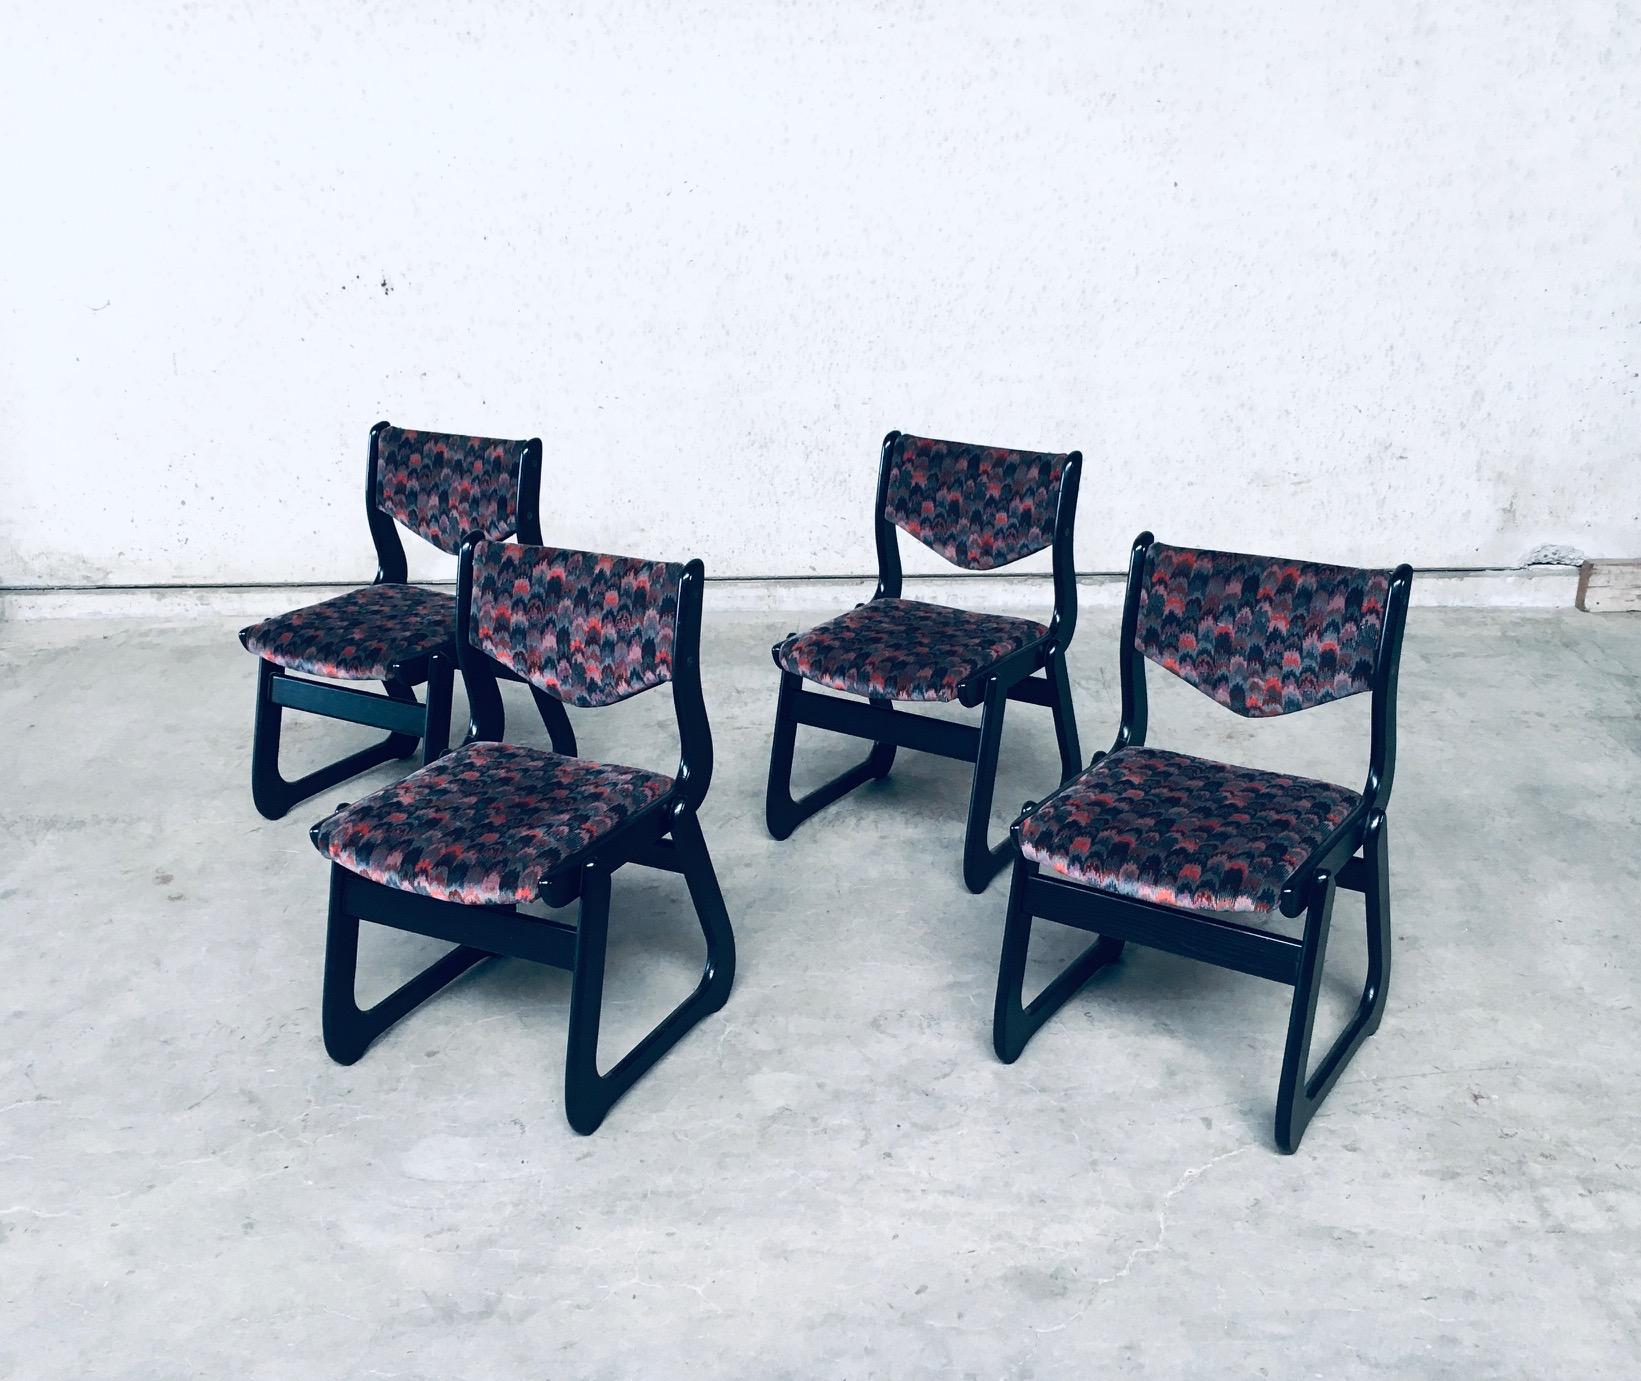 Vintage Mid-Century Modern design set of 4 black stained laquered wood dining or kitchen chairs. Made in the 1970's. No maker markings. Black stained wooden frame with multicolored fabric seat and back. These are in very good condition. All